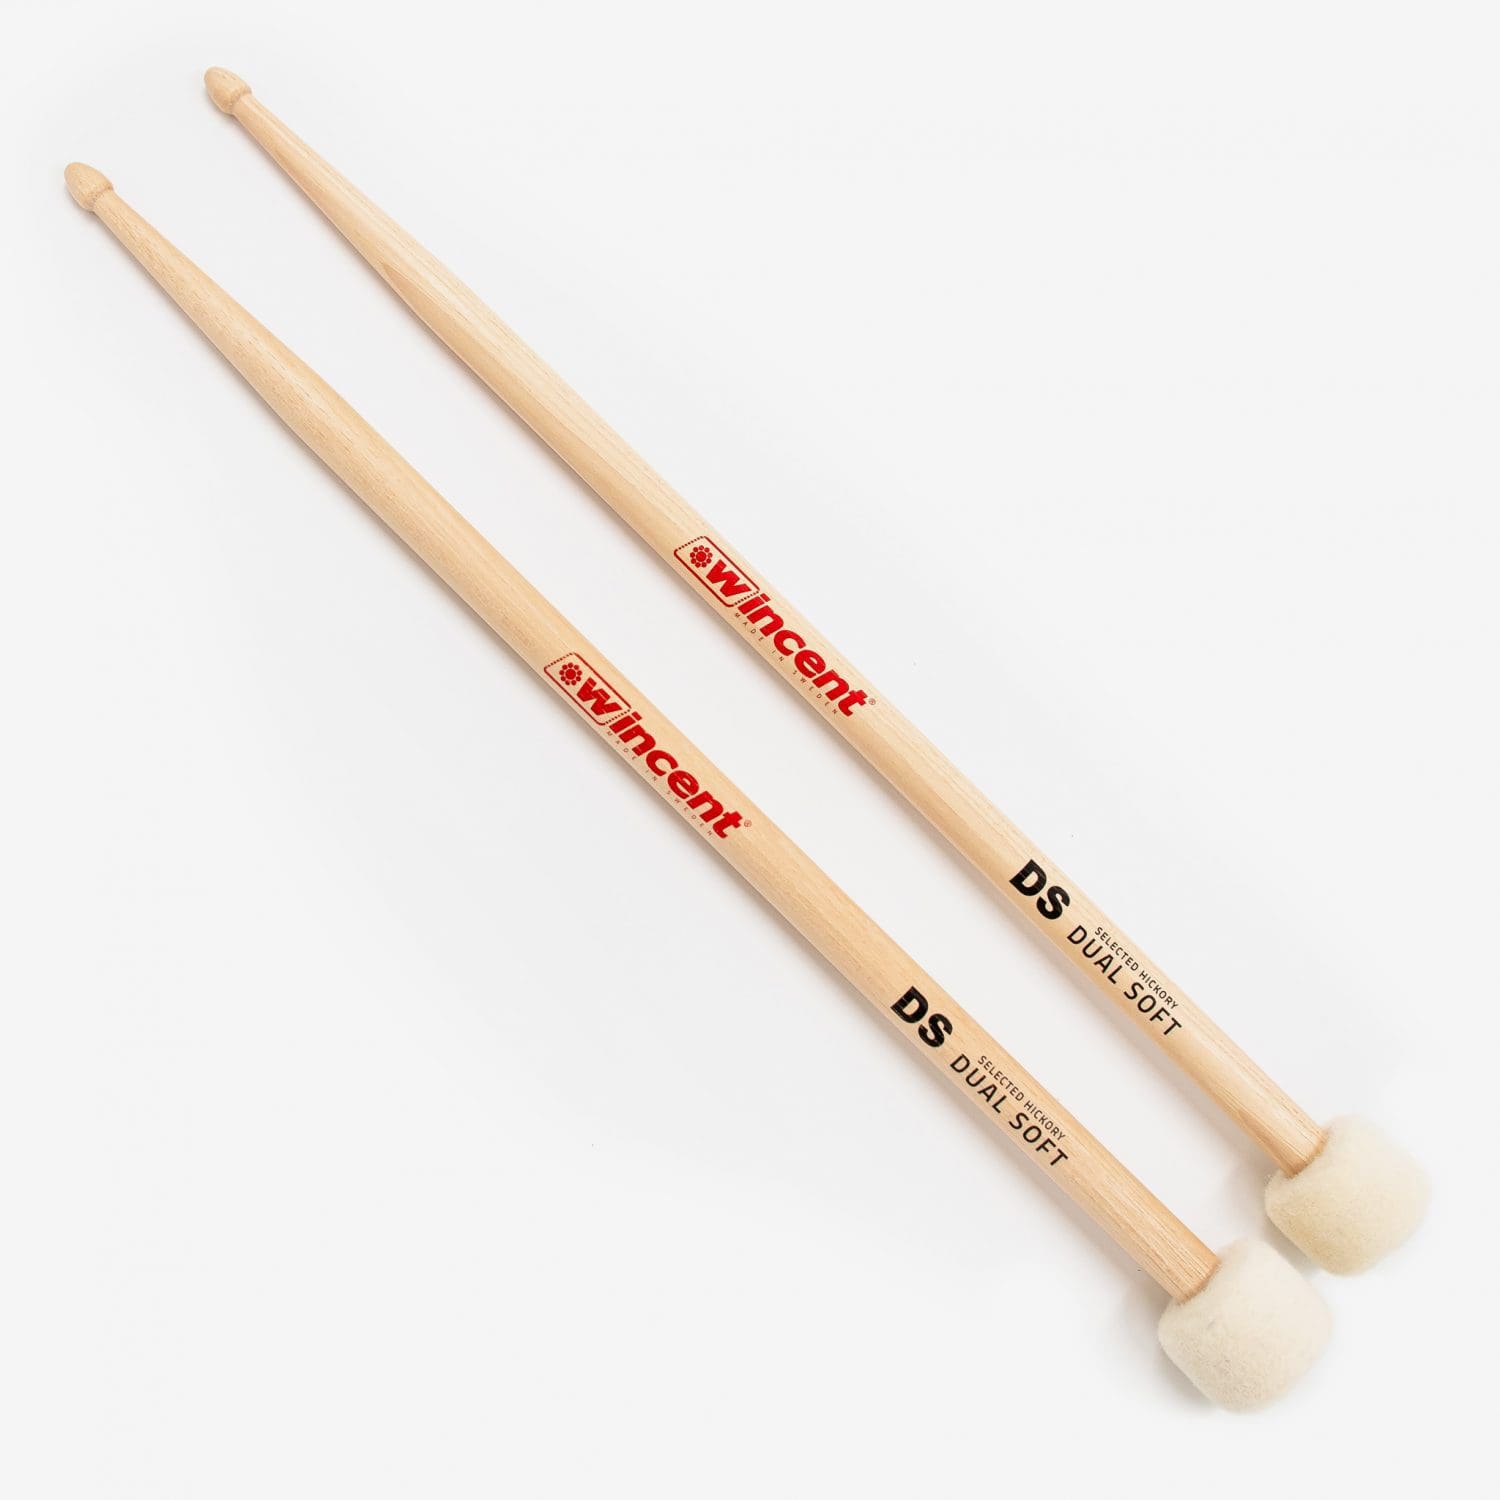 Dual Soft Double Sided Cymbal Mallet Pair